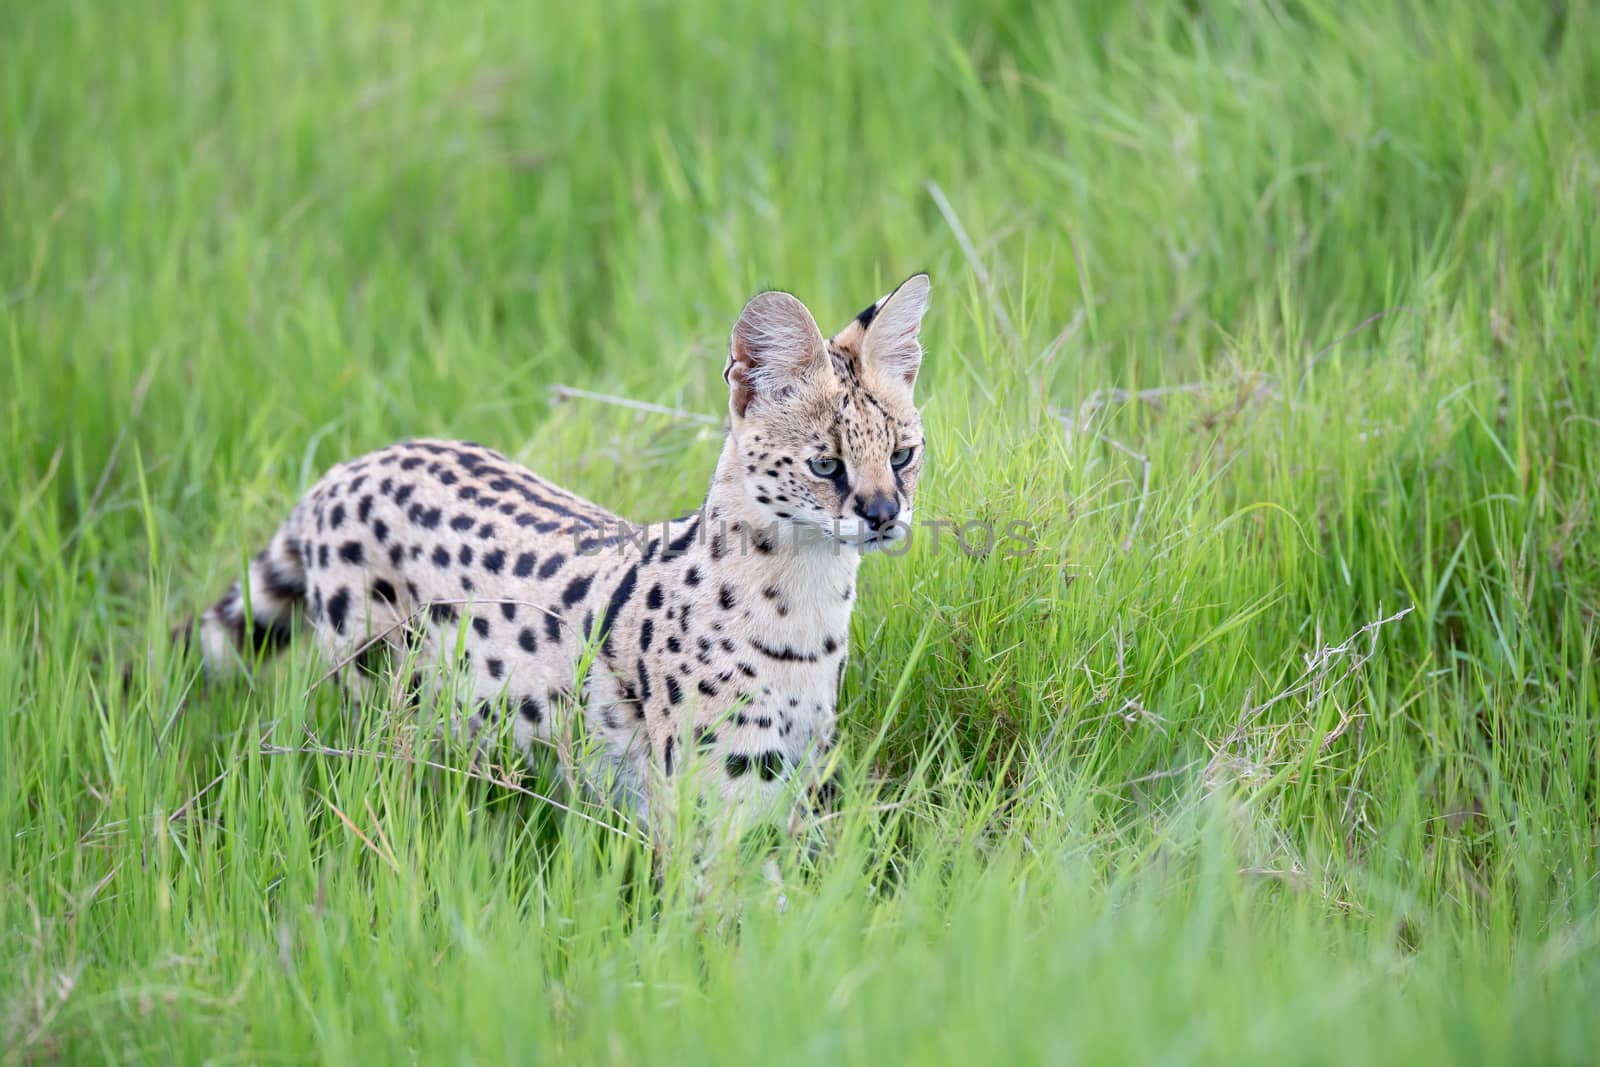 Serval cat in the grassland of the savannah in Kenya by 25ehaag6